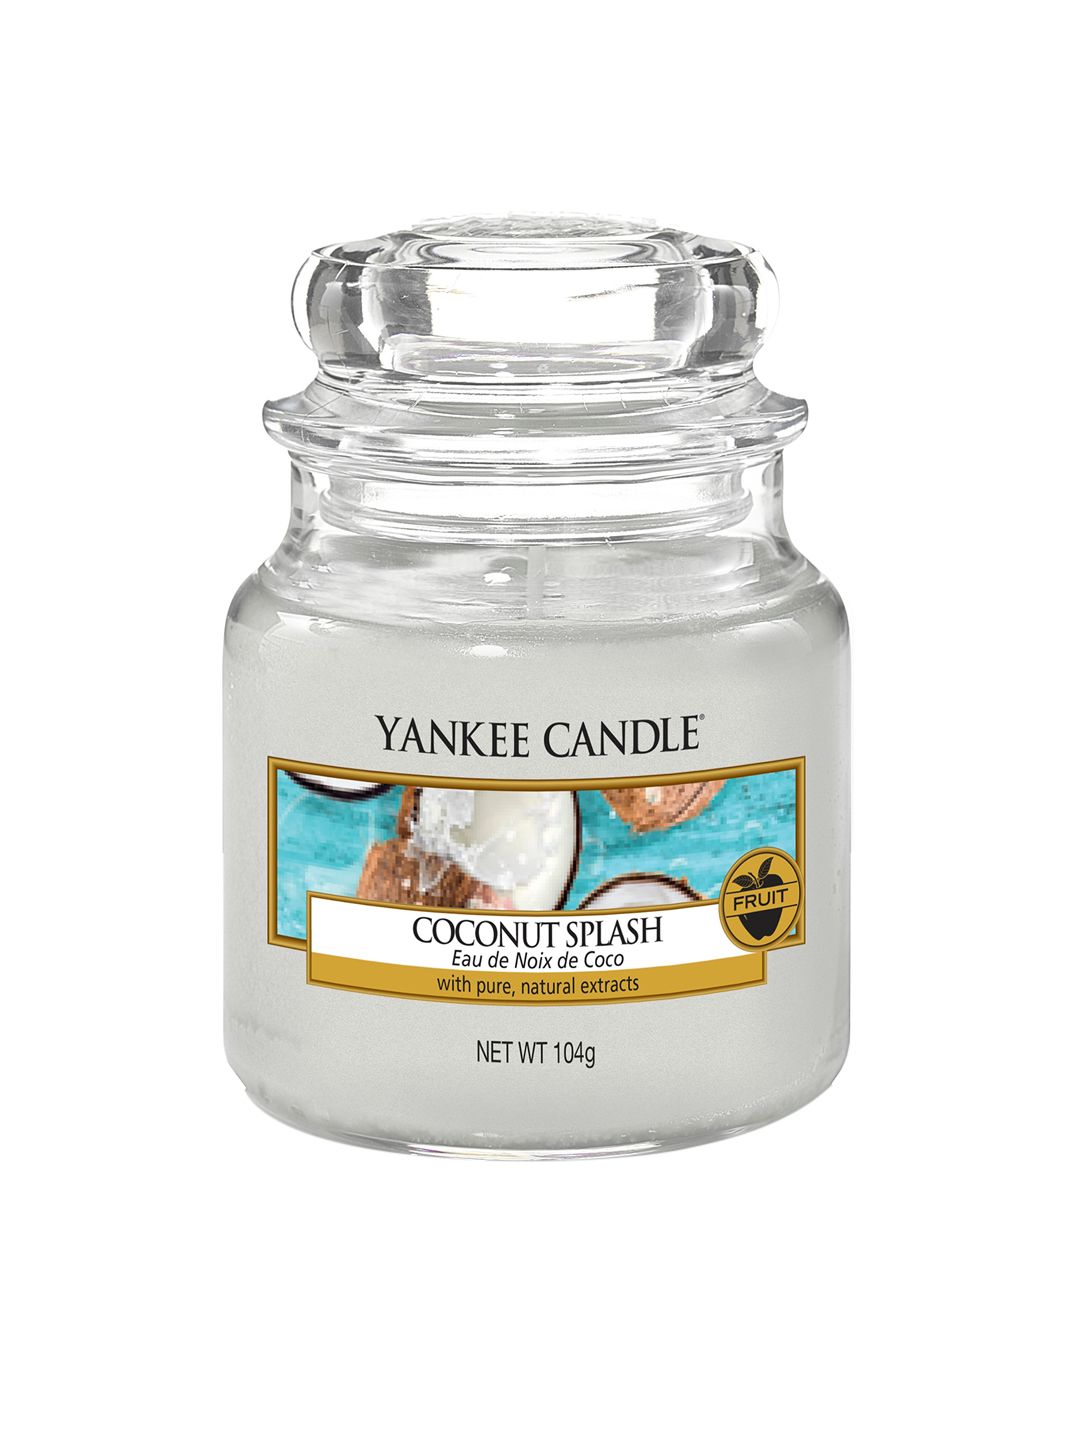 YANKEE CANDLE White Classic Small Jar Coconut Splash Scented Candle Price in India